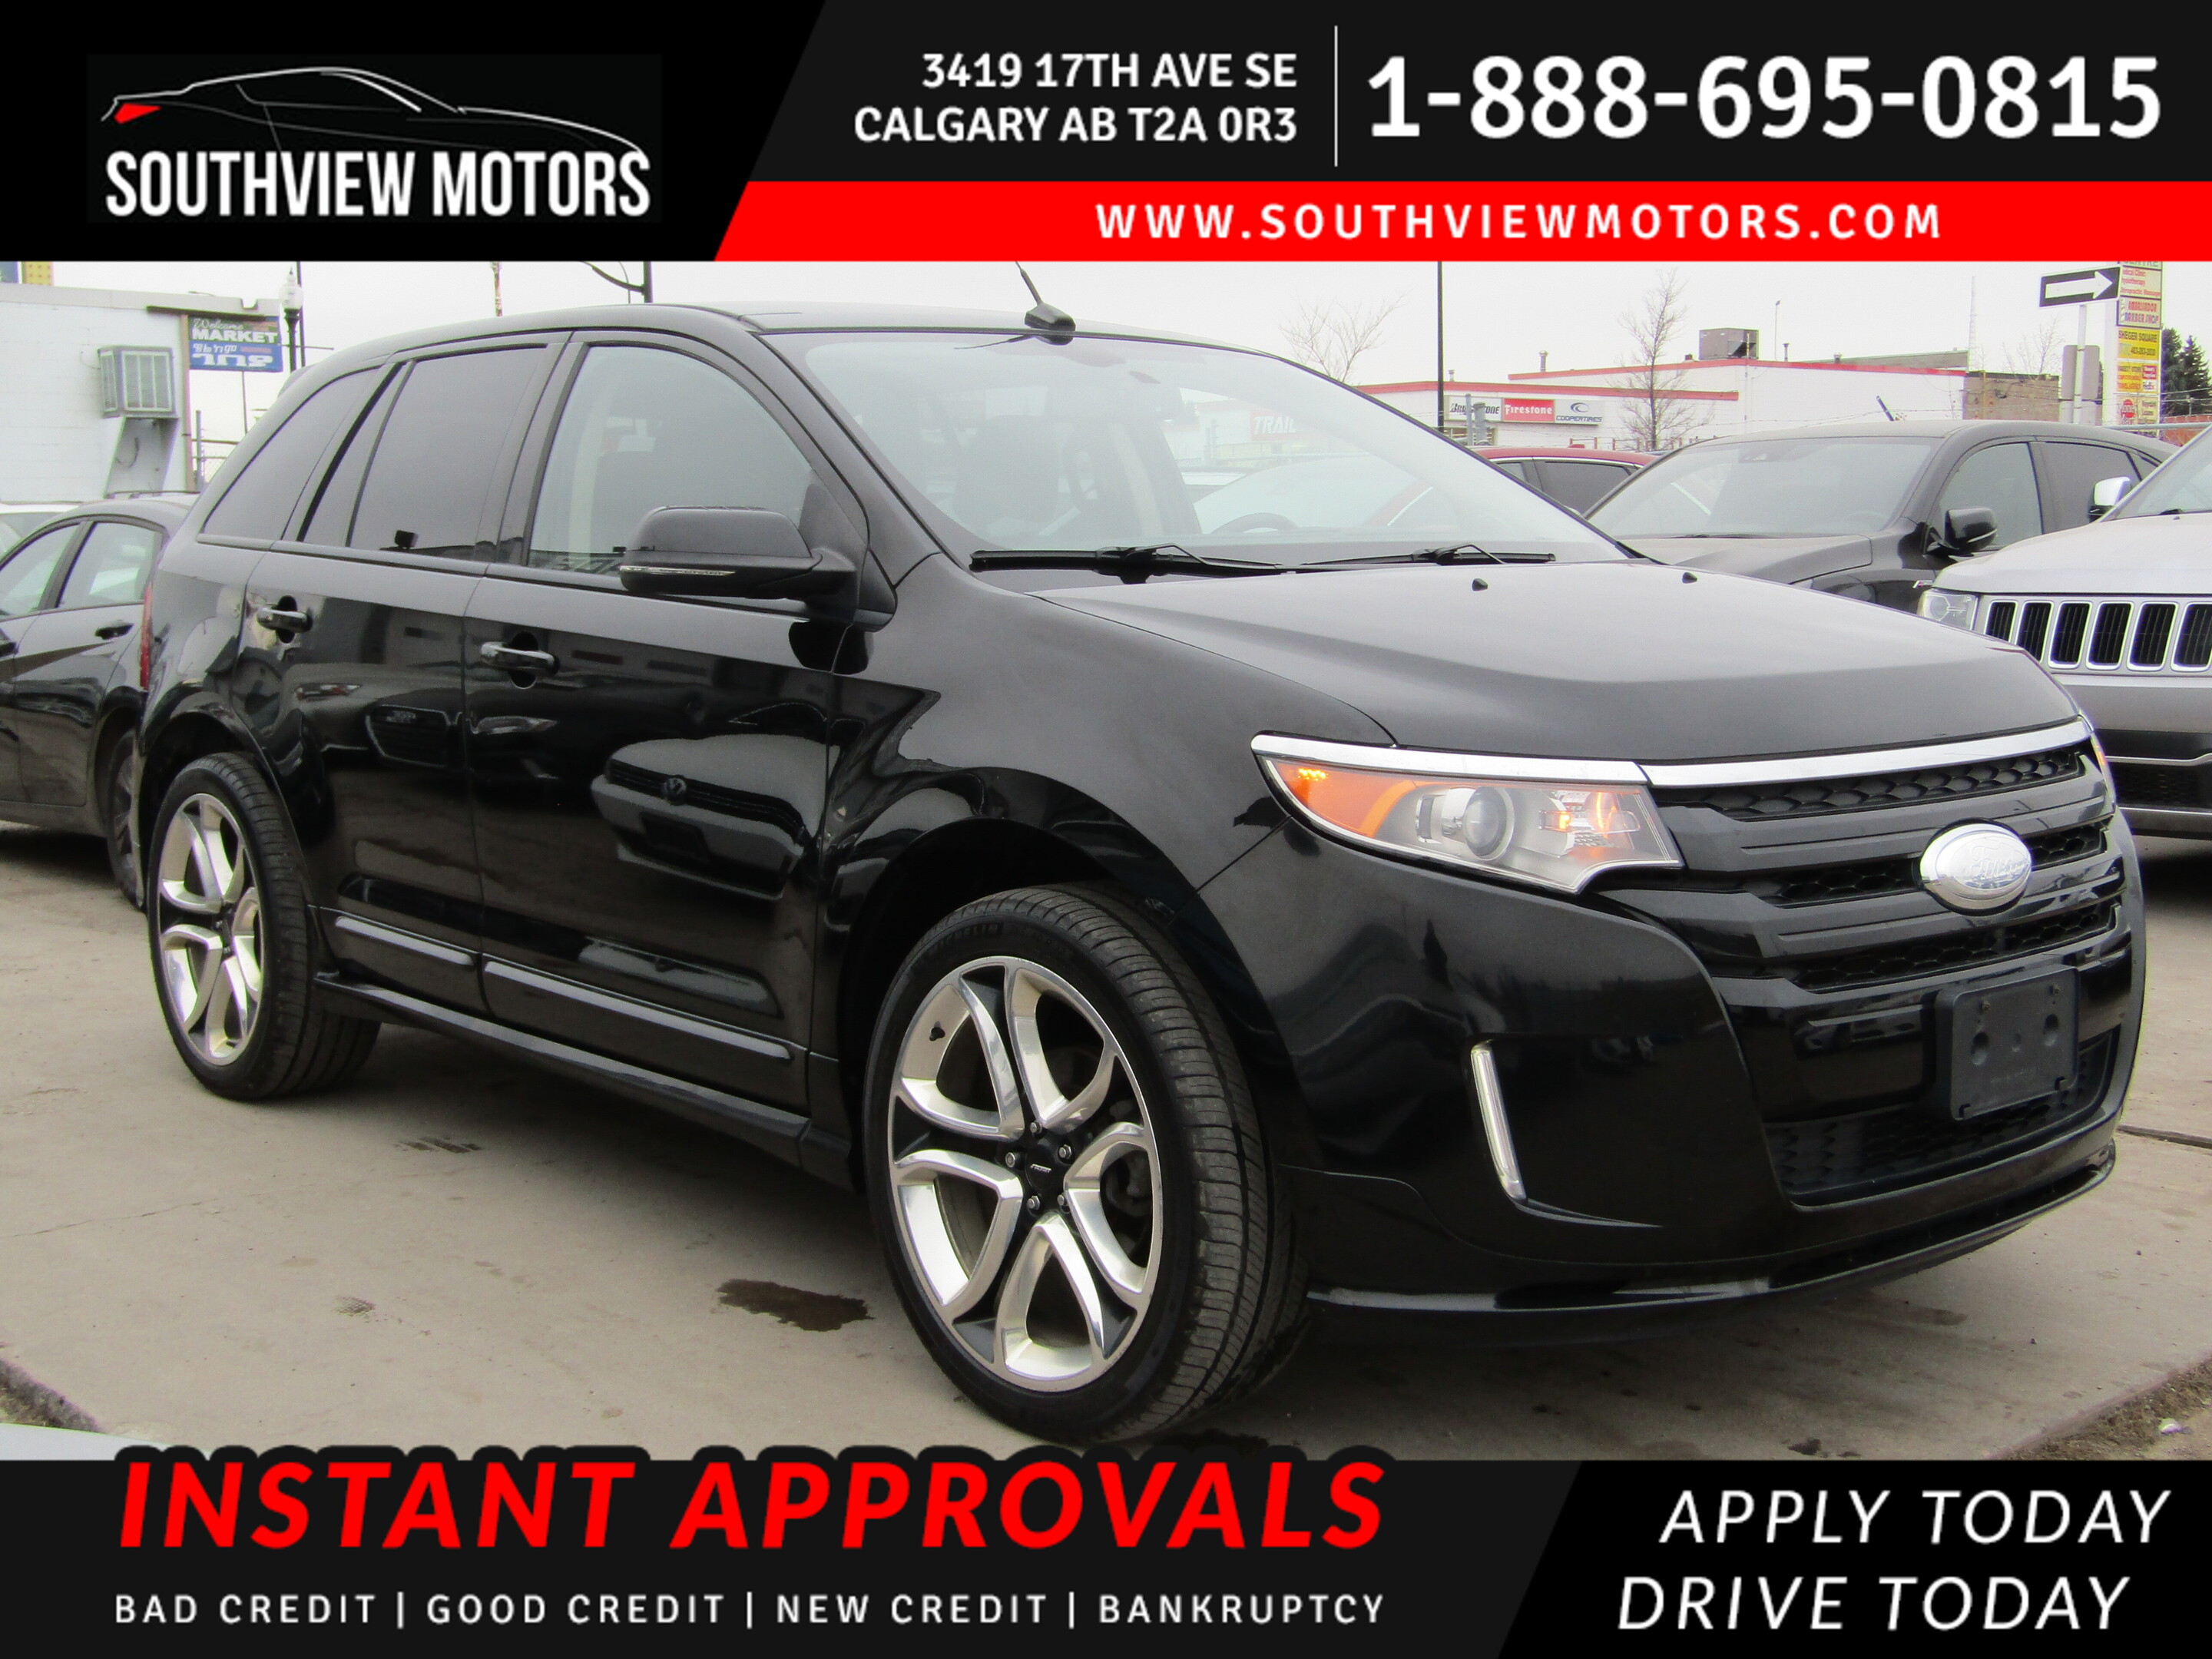 2012 Ford Edge SPORT AWD NAV/CAM/PANO ROOF/LEATHER/NEW TIRES 